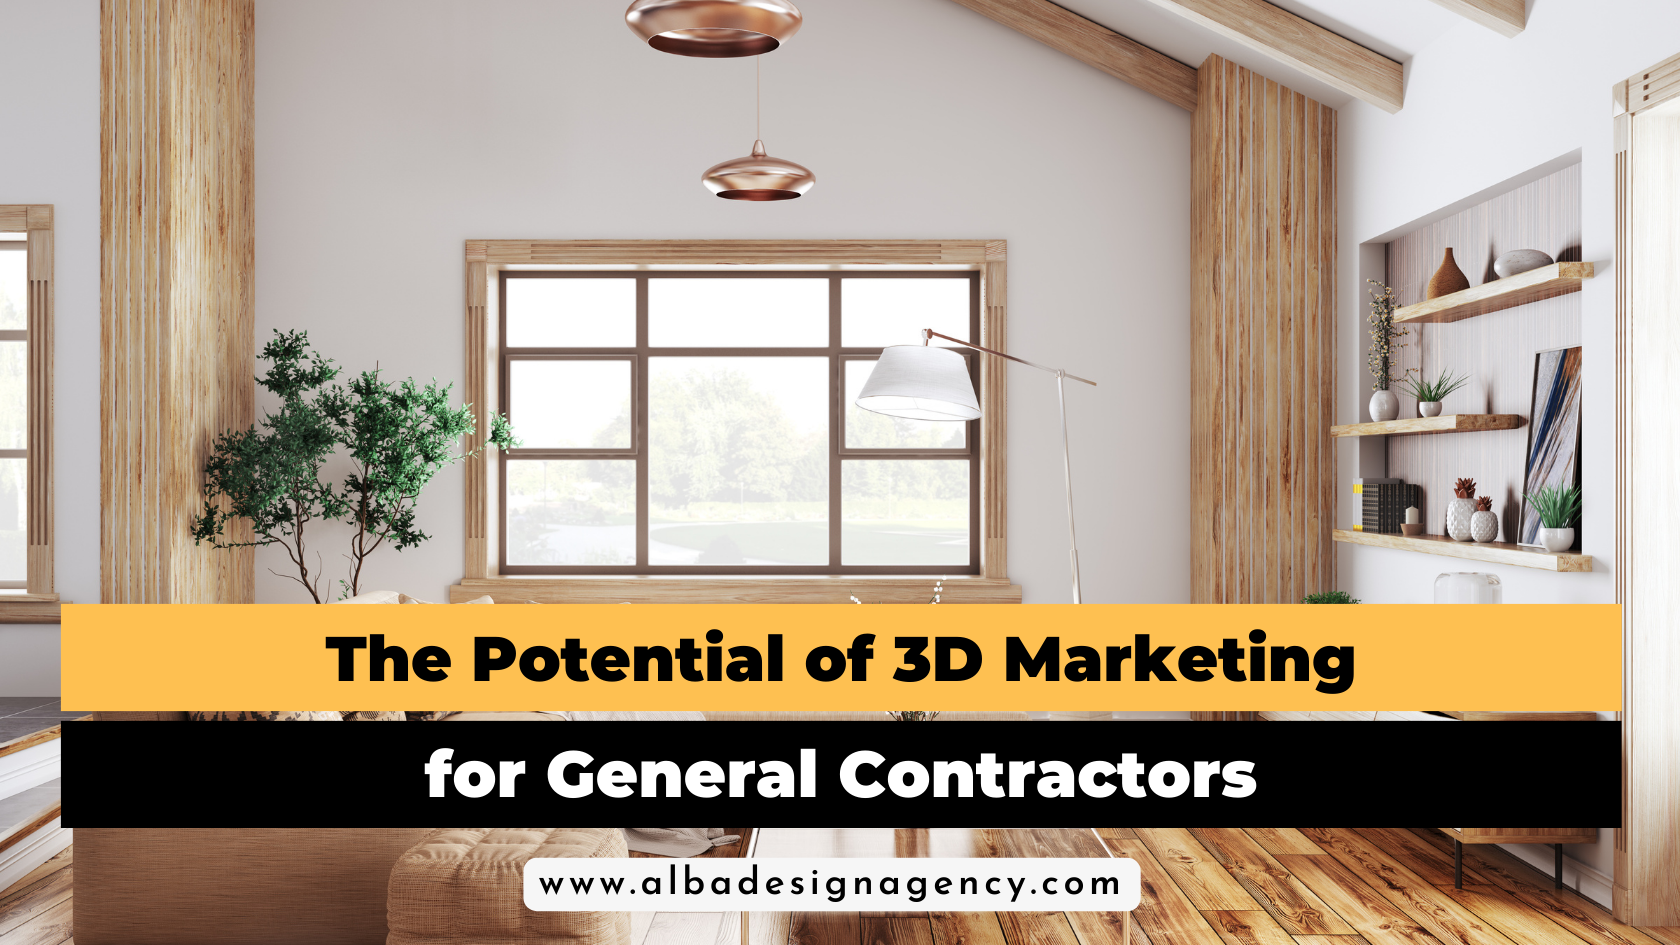 The Potential of 3D Marketing for General Contractors